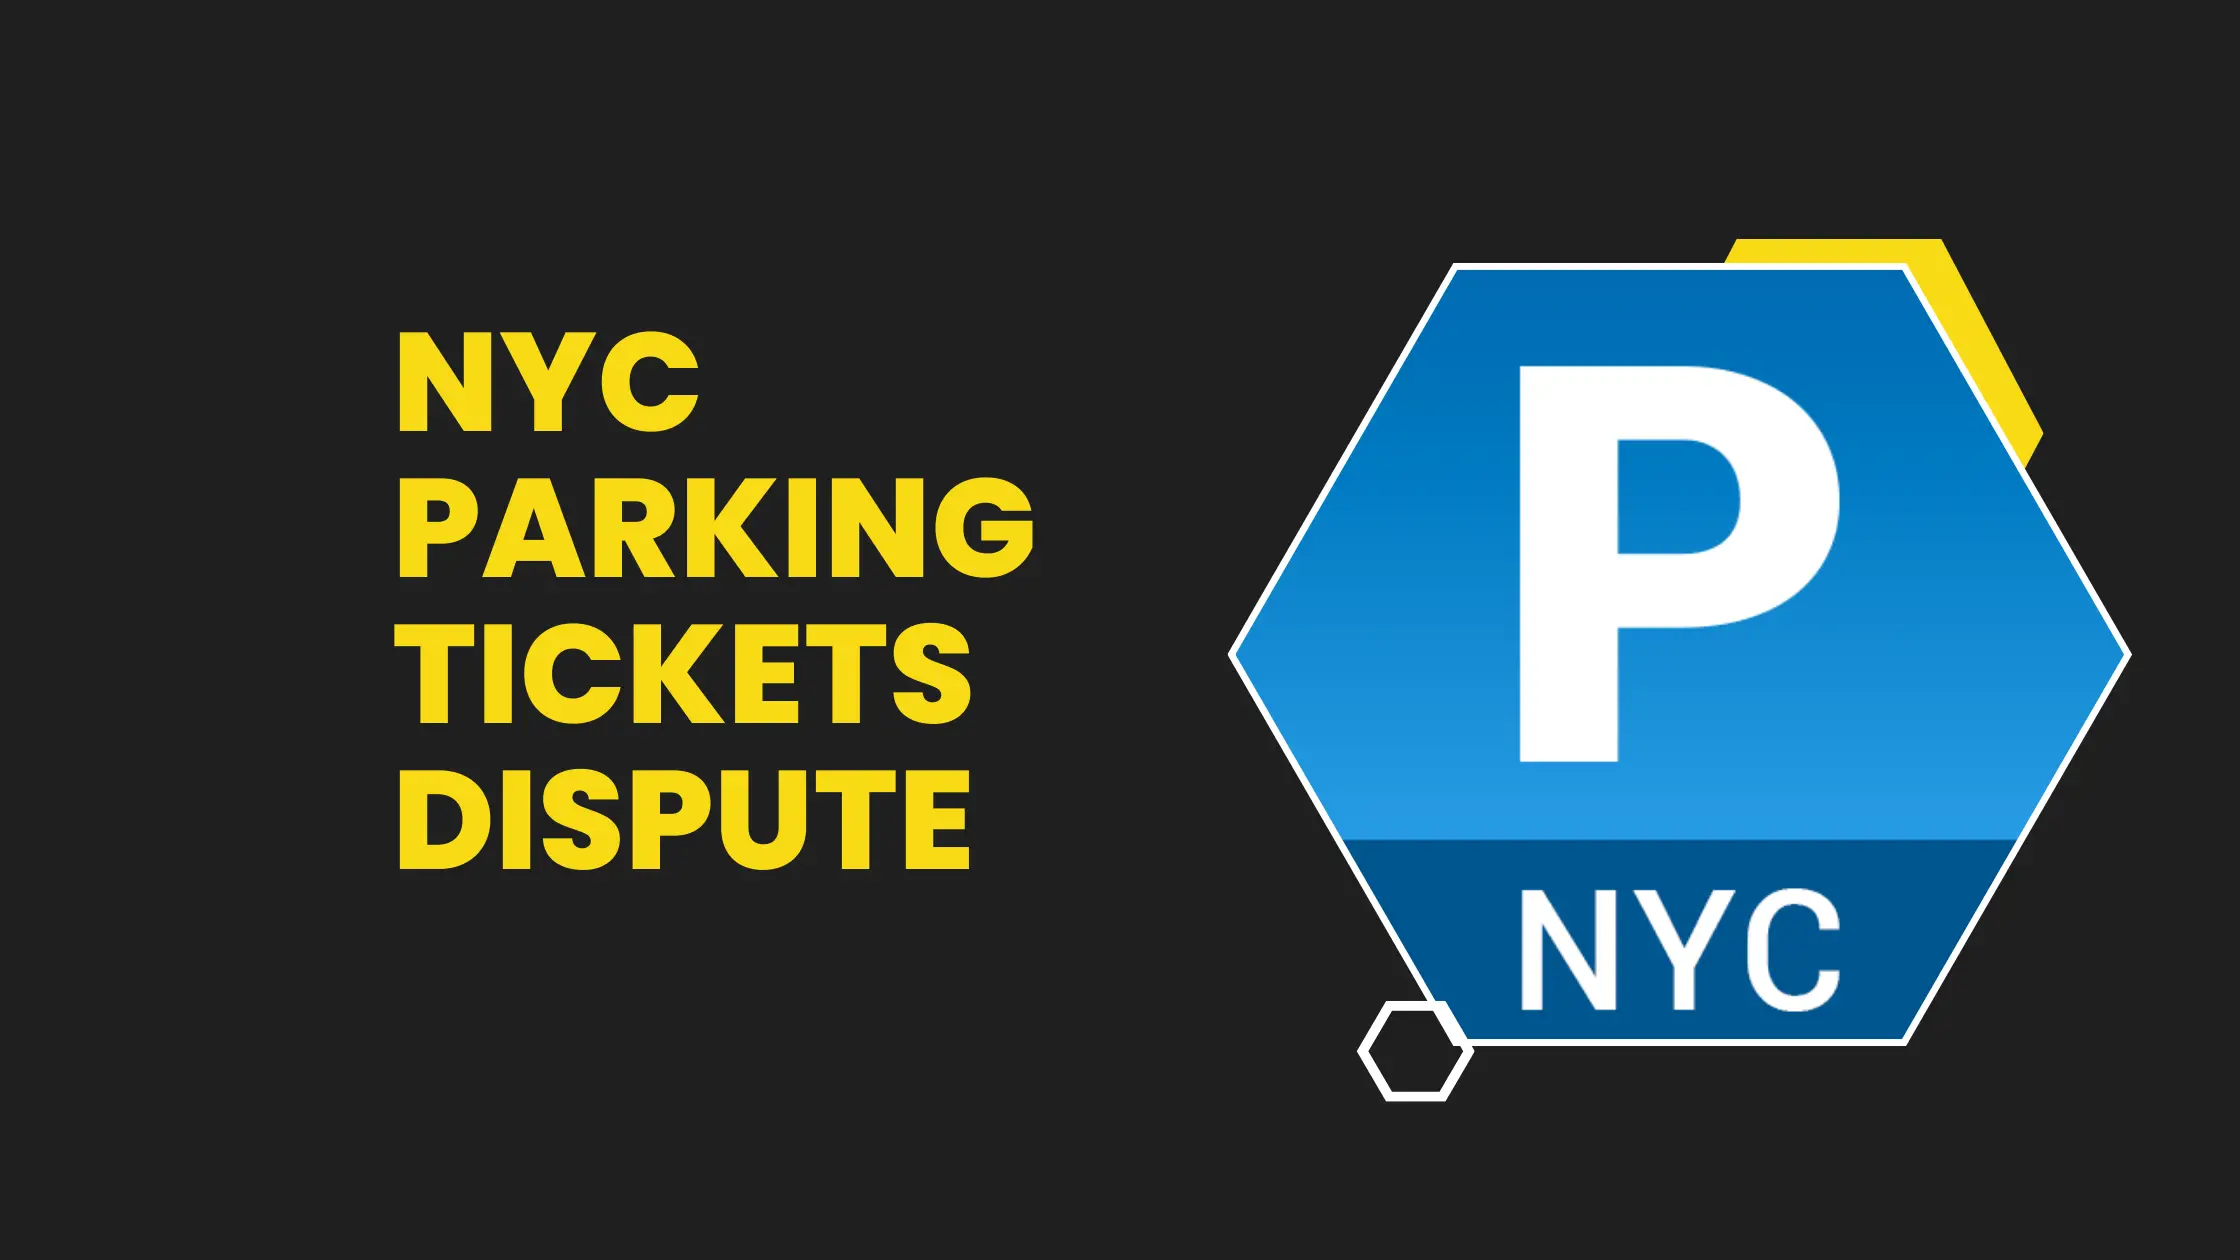 NYC Parking Tickets Dispute